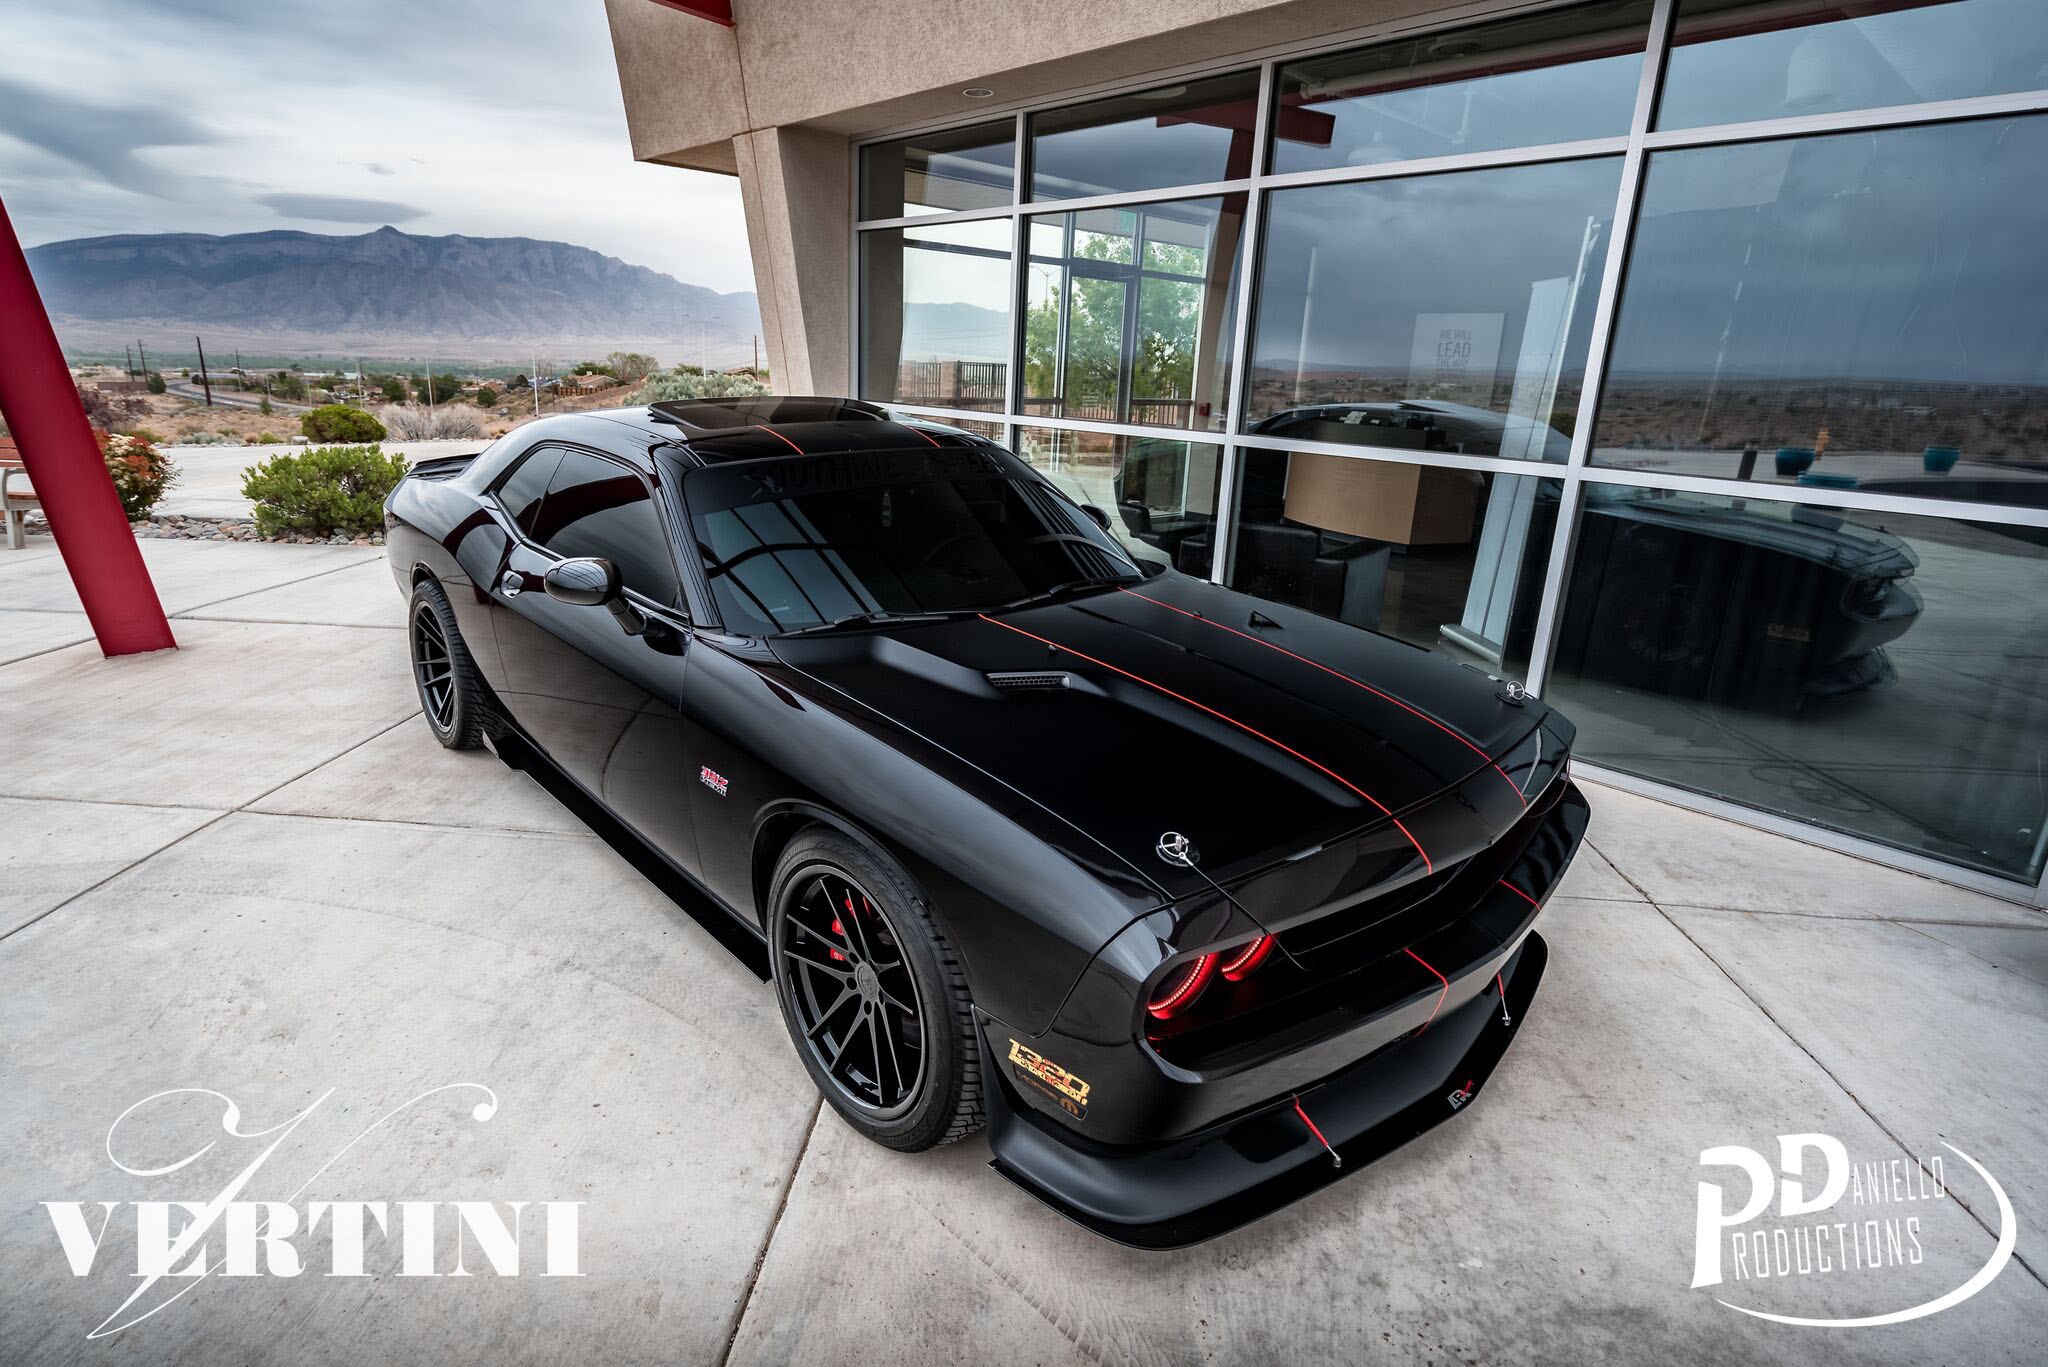 Aftermarket Front Bumper Lip on Black Dodge Challenger - Photo by Vertini Wheels